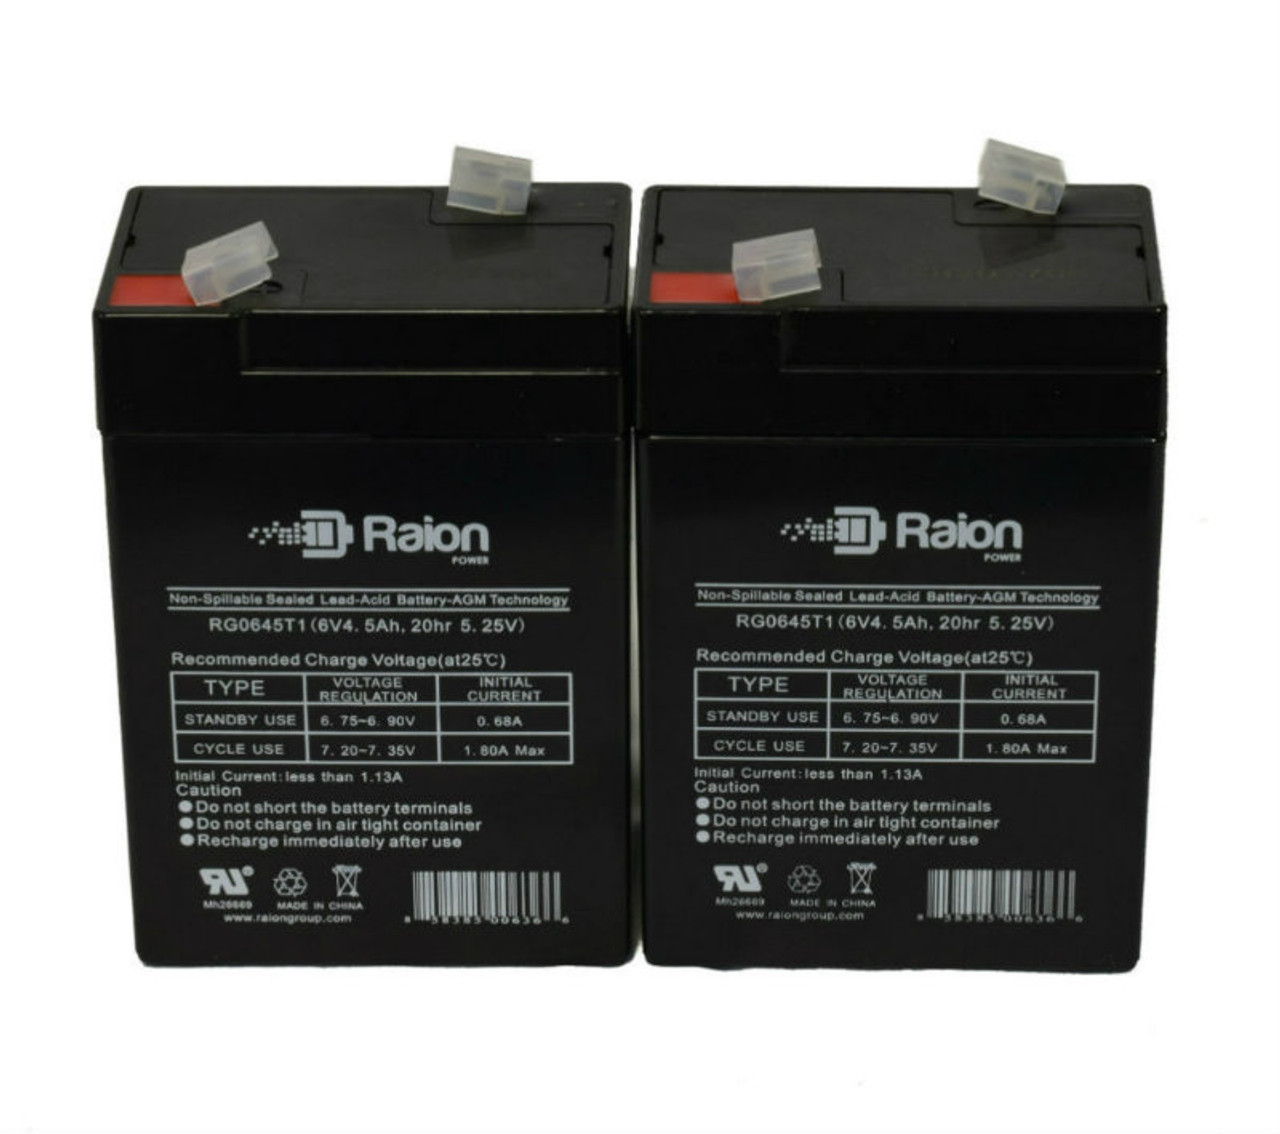 Raion Power RG0645T1 6V 4.5Ah Replacement Medical Equipment Battery for Nellcor NPB 295 - 2 Pack